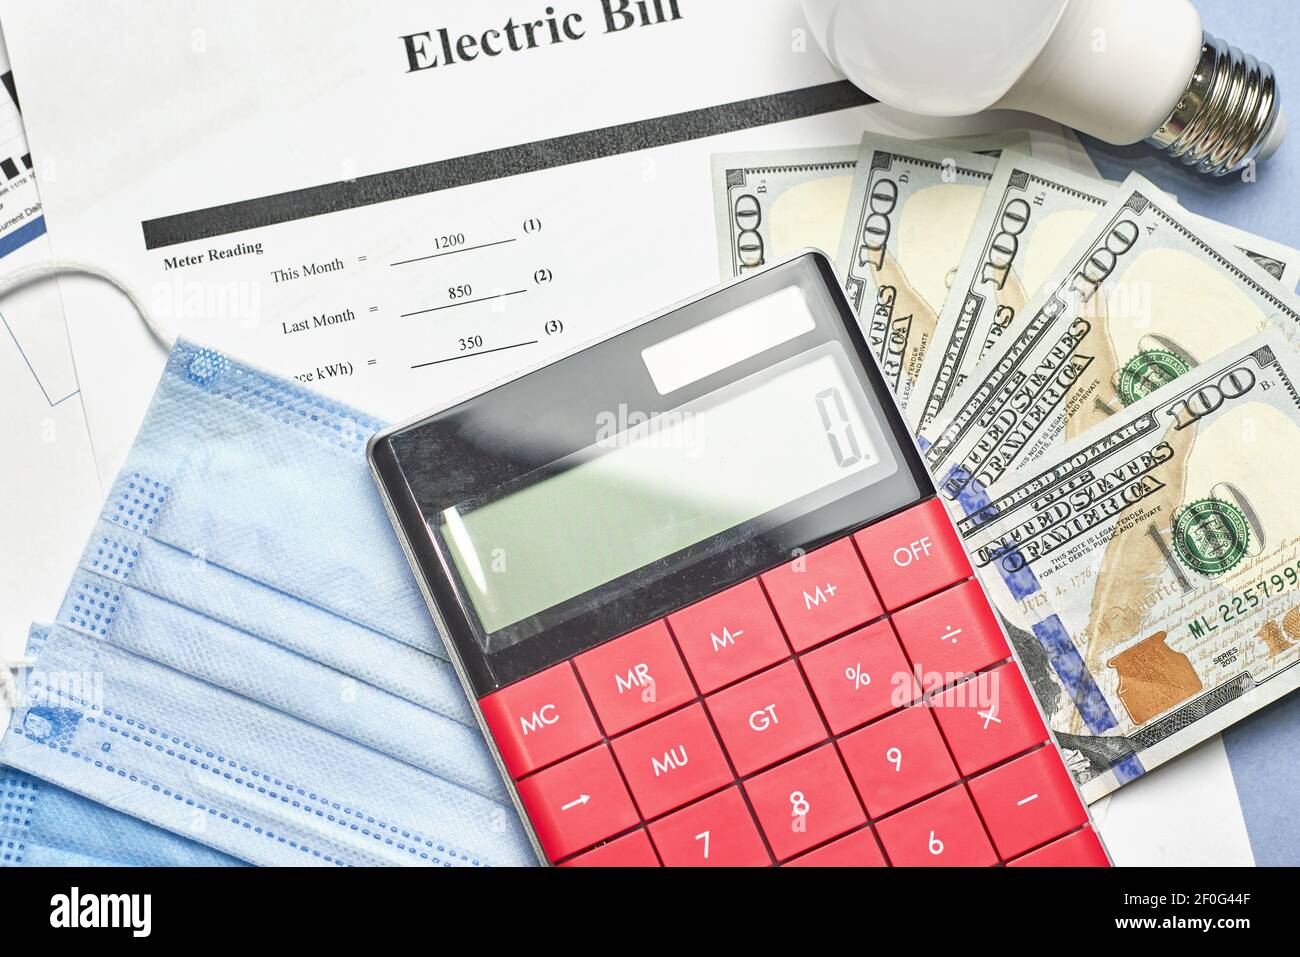 monthly-utility-bills-cost-of-utilities-planning-for-utility-costs-in